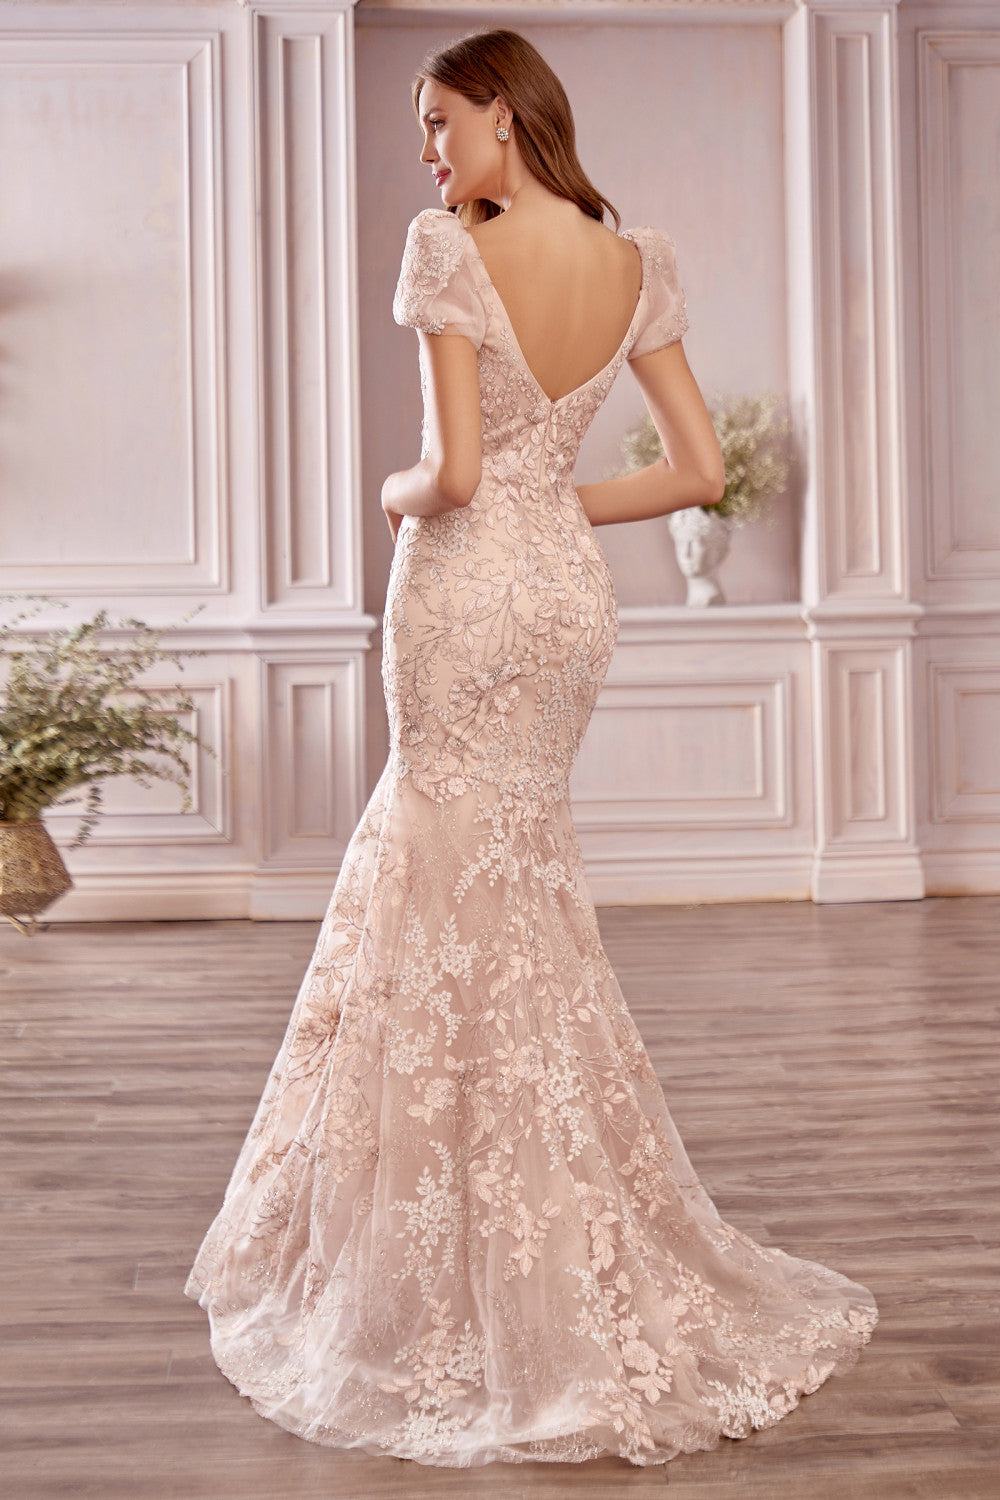 Elegant Long Mermaid Sweetheart Backless Lace Prom Dress with Sleeves-BIZTUNNEL